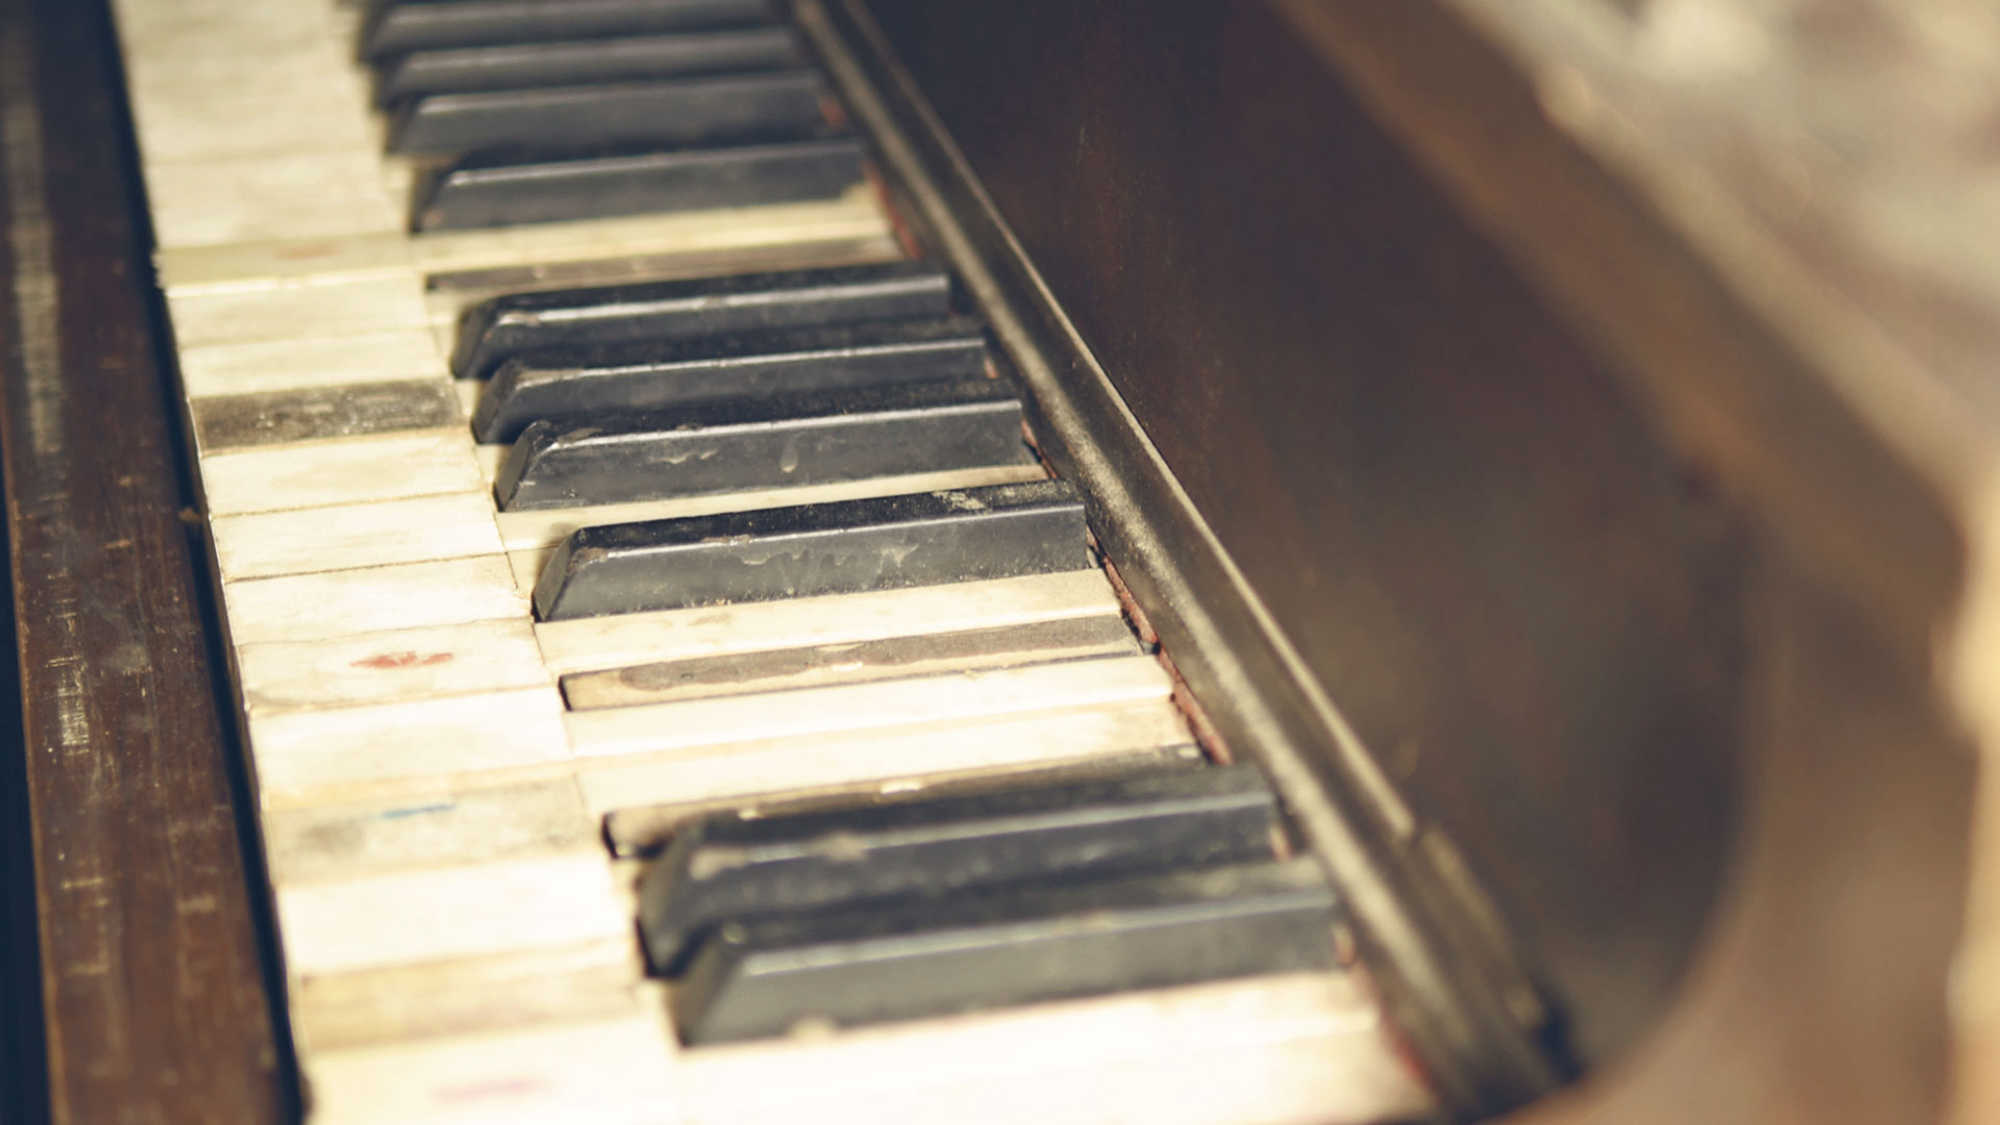 An old piano.